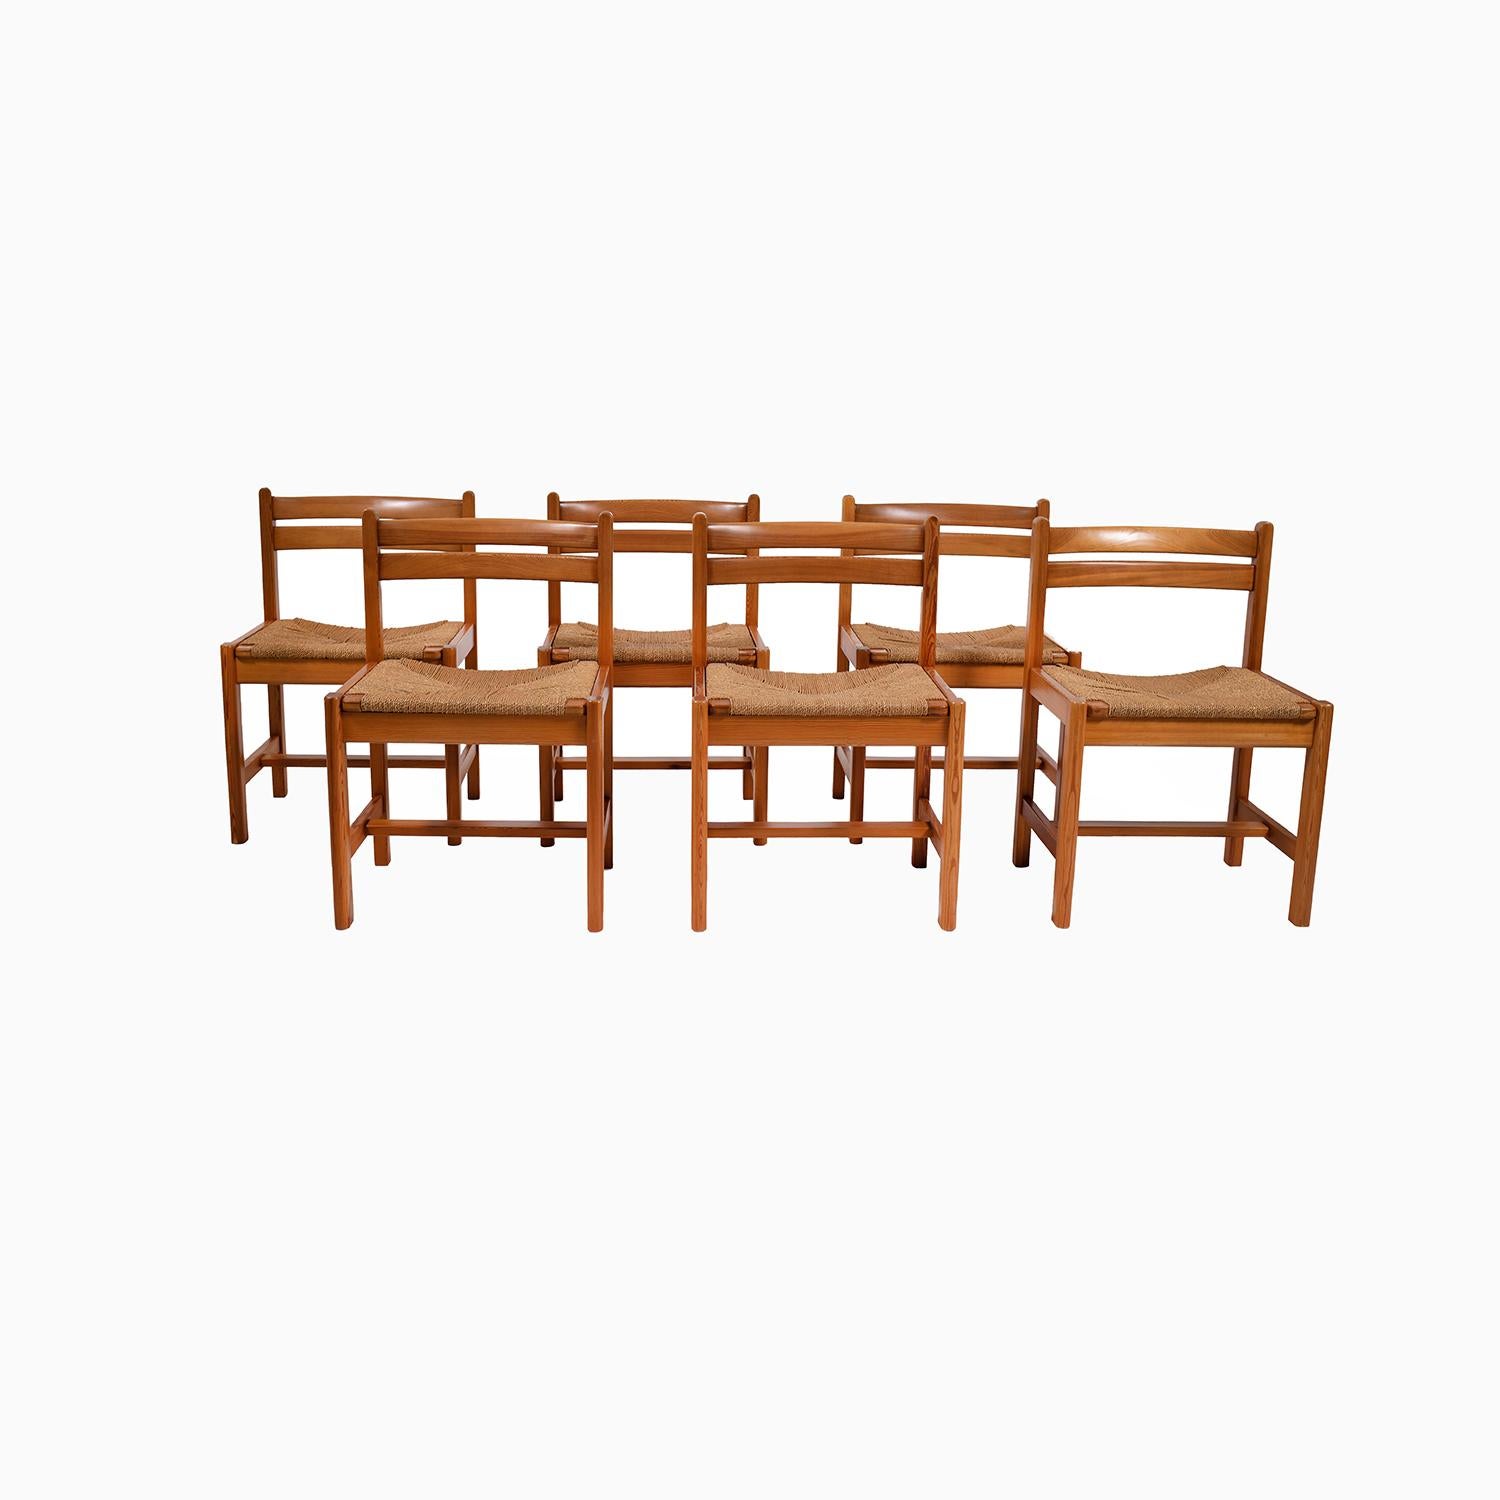 An original and lightly restored set of pine and seagrass “Asserbo” dining chairs. Design by Borge Mogensen for Karl Andersson & Soner. Original seagrass seats are in very nice shape with lots of life left.

Professional, skilled furniture